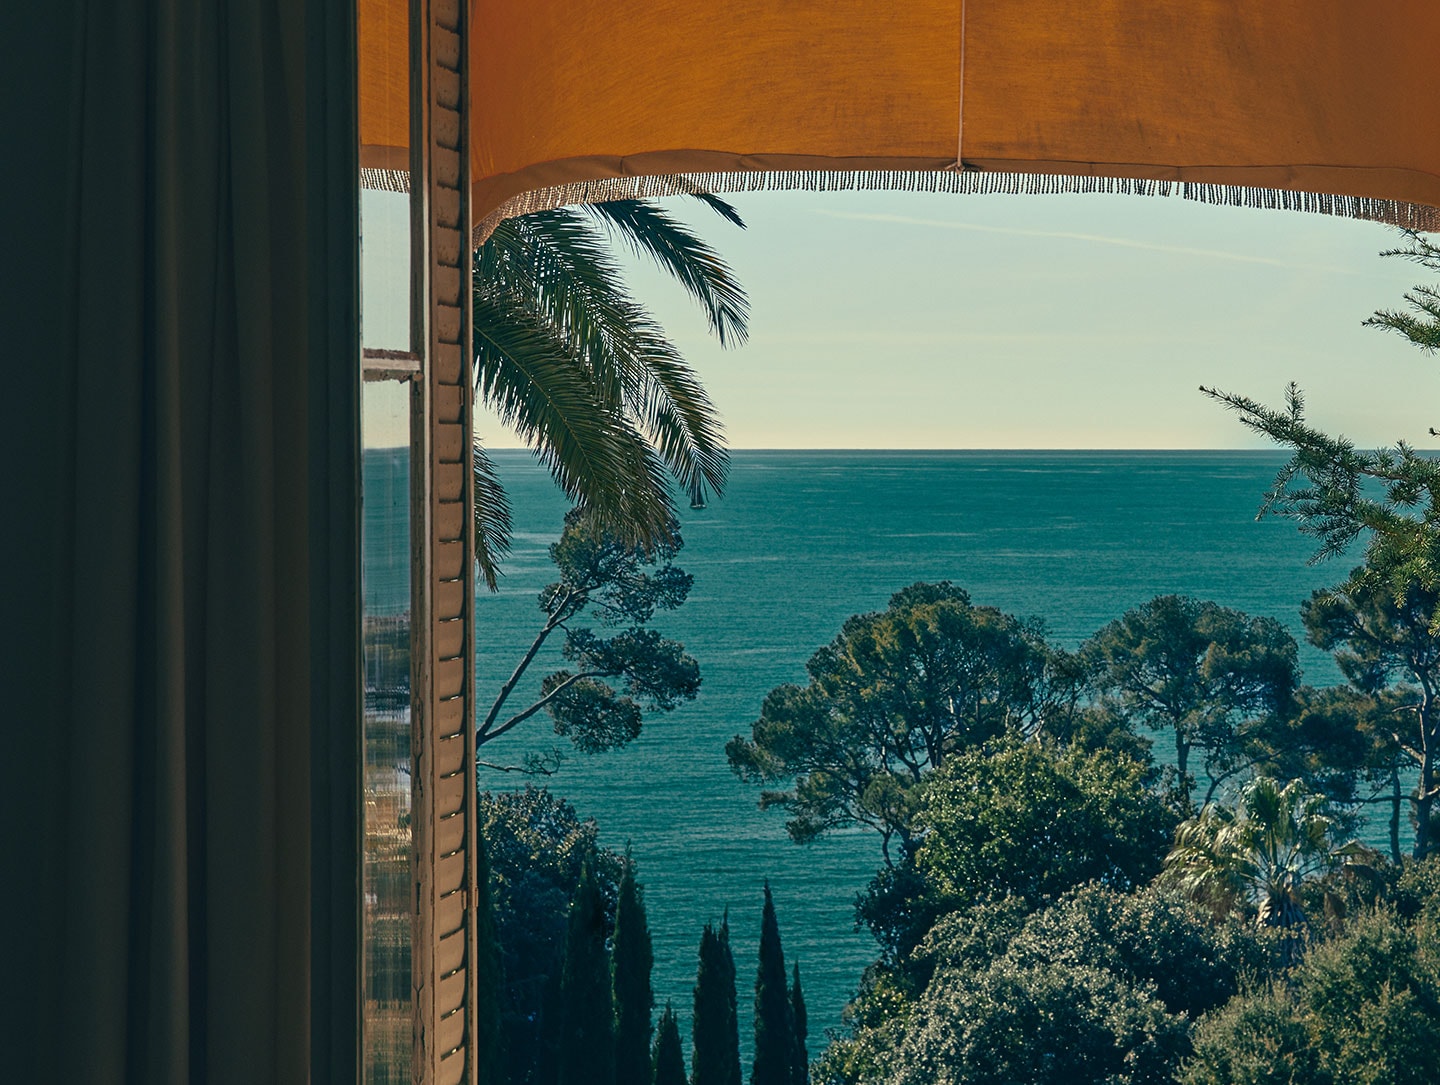 palm trees and ocean view visible through window